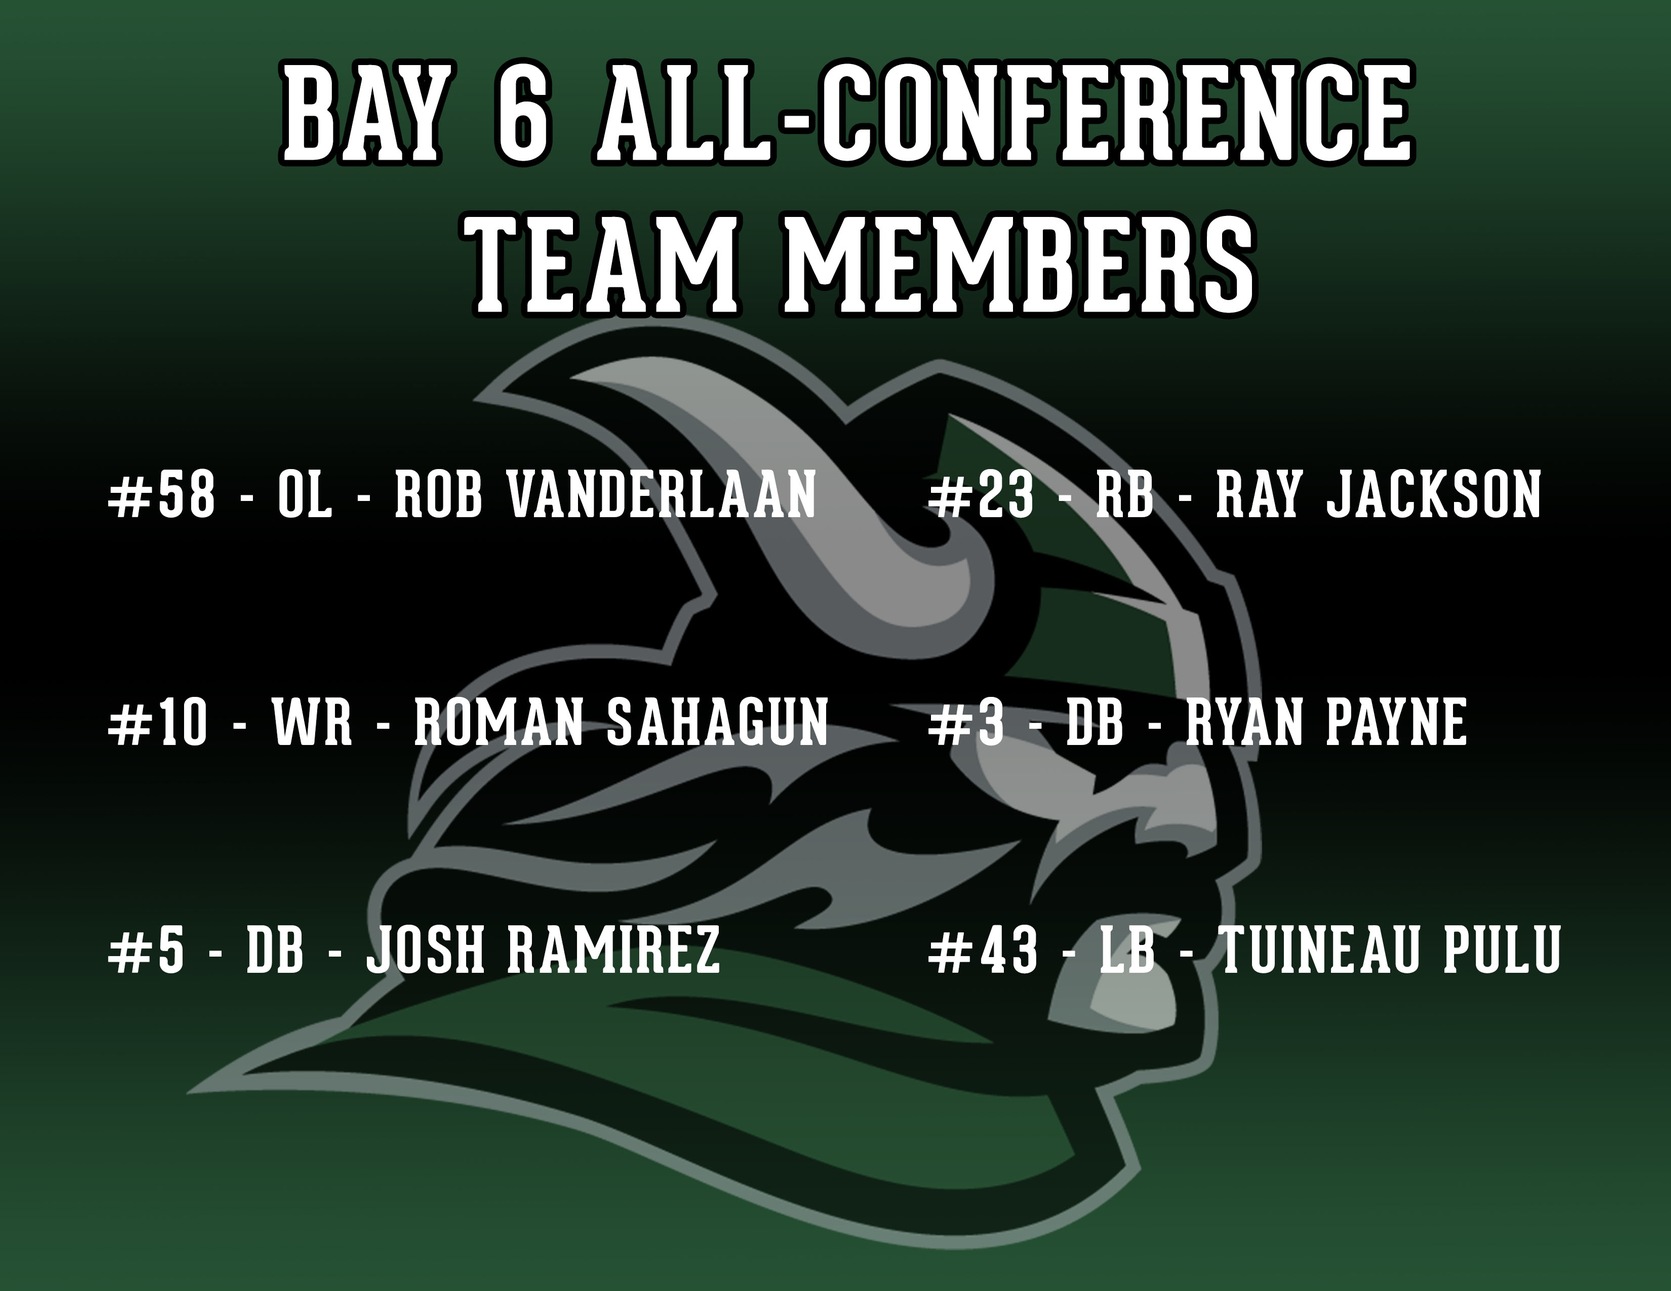 6 players named to Bay 6 All-Conference Team